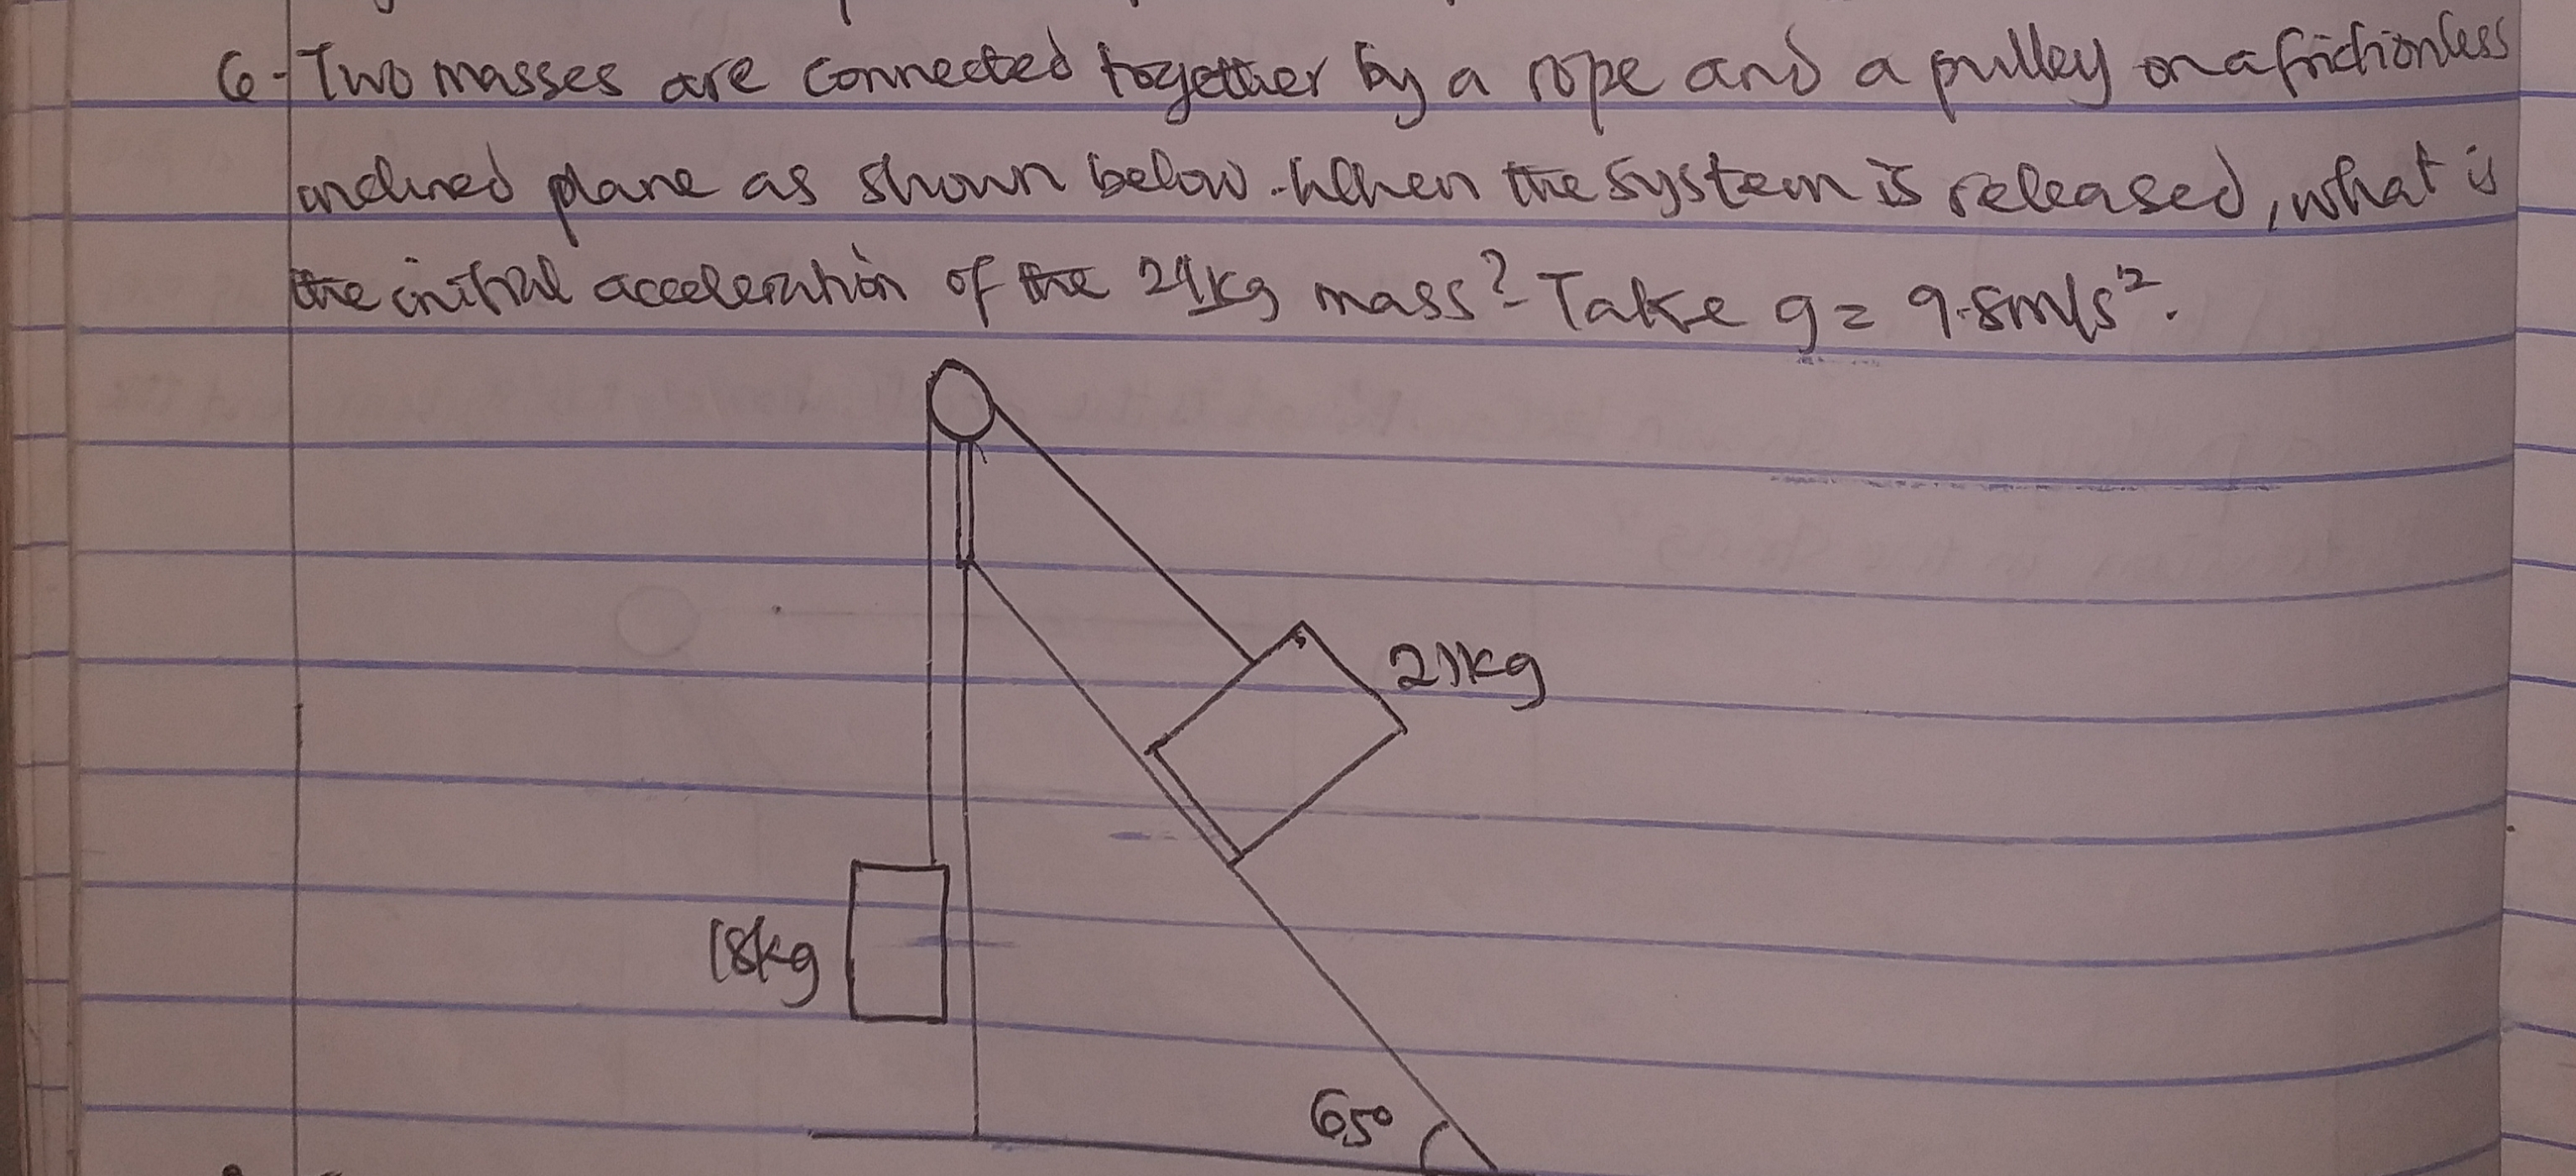 hegetther by a ope and a pulley onafrich
londined plane as shown below -hlhen the System is released, uhat s
the cnttral accelenhon of fre 24kg mass? Takegz 9.8m/s.
Two masses are Connected
